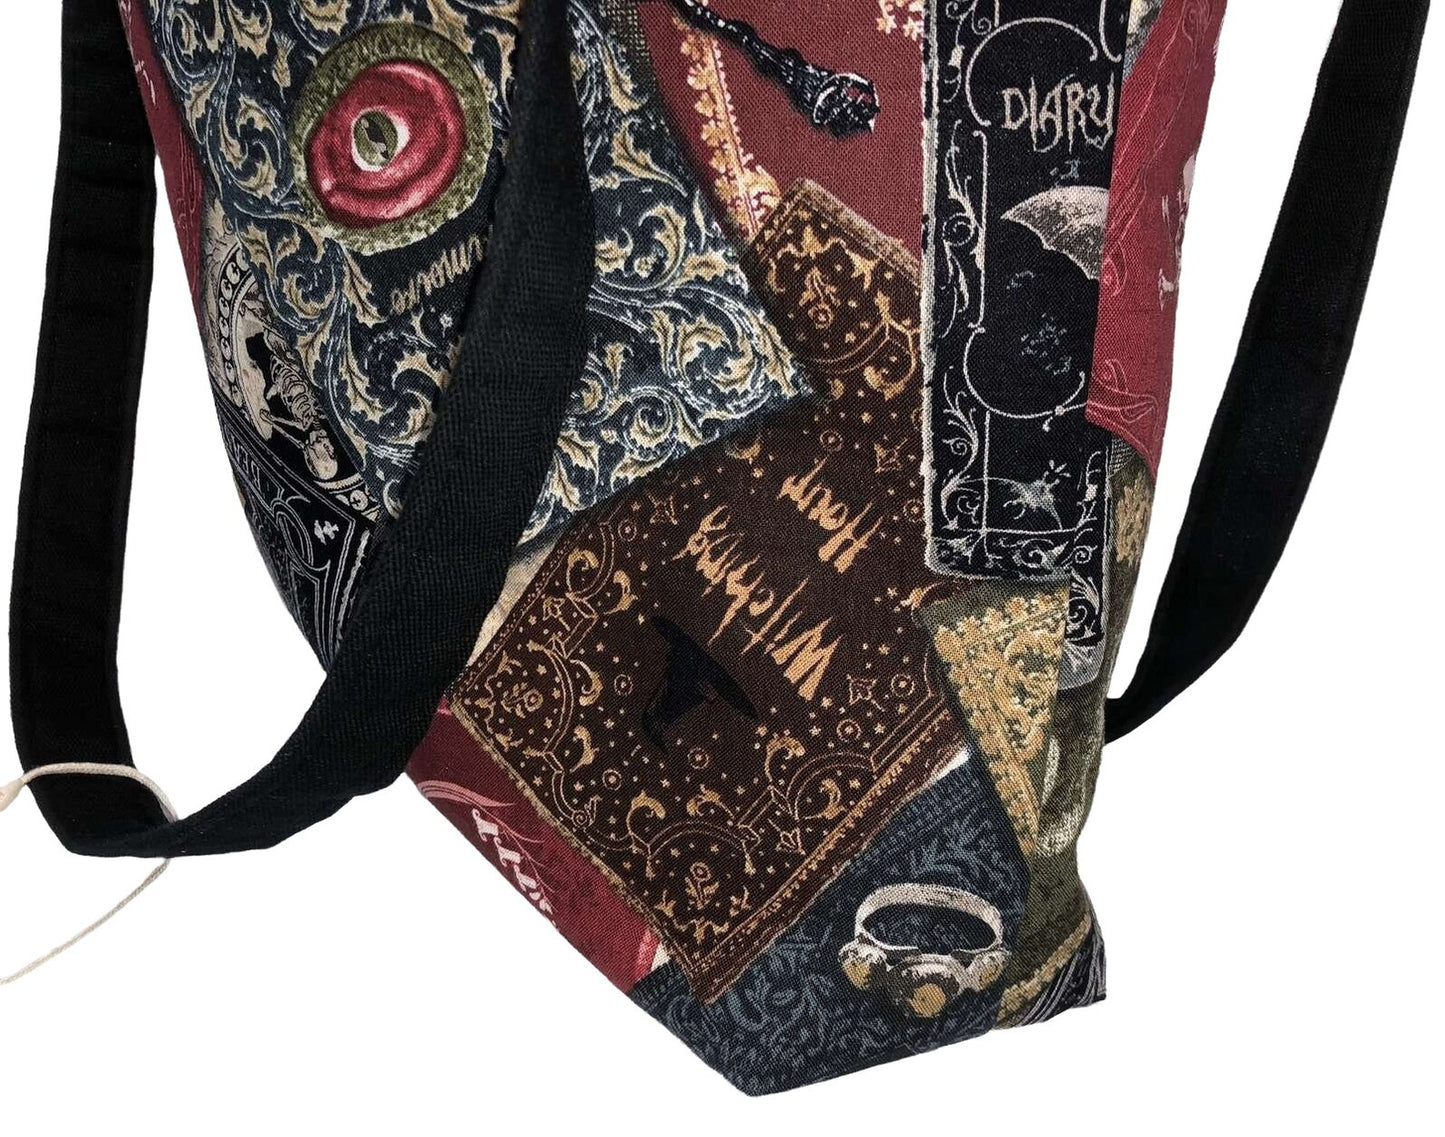 Gothic Spell Books Shoulder Bag Witchy Halloween Grimoire Purse Witchcraft Handbag Tote + Key FOB